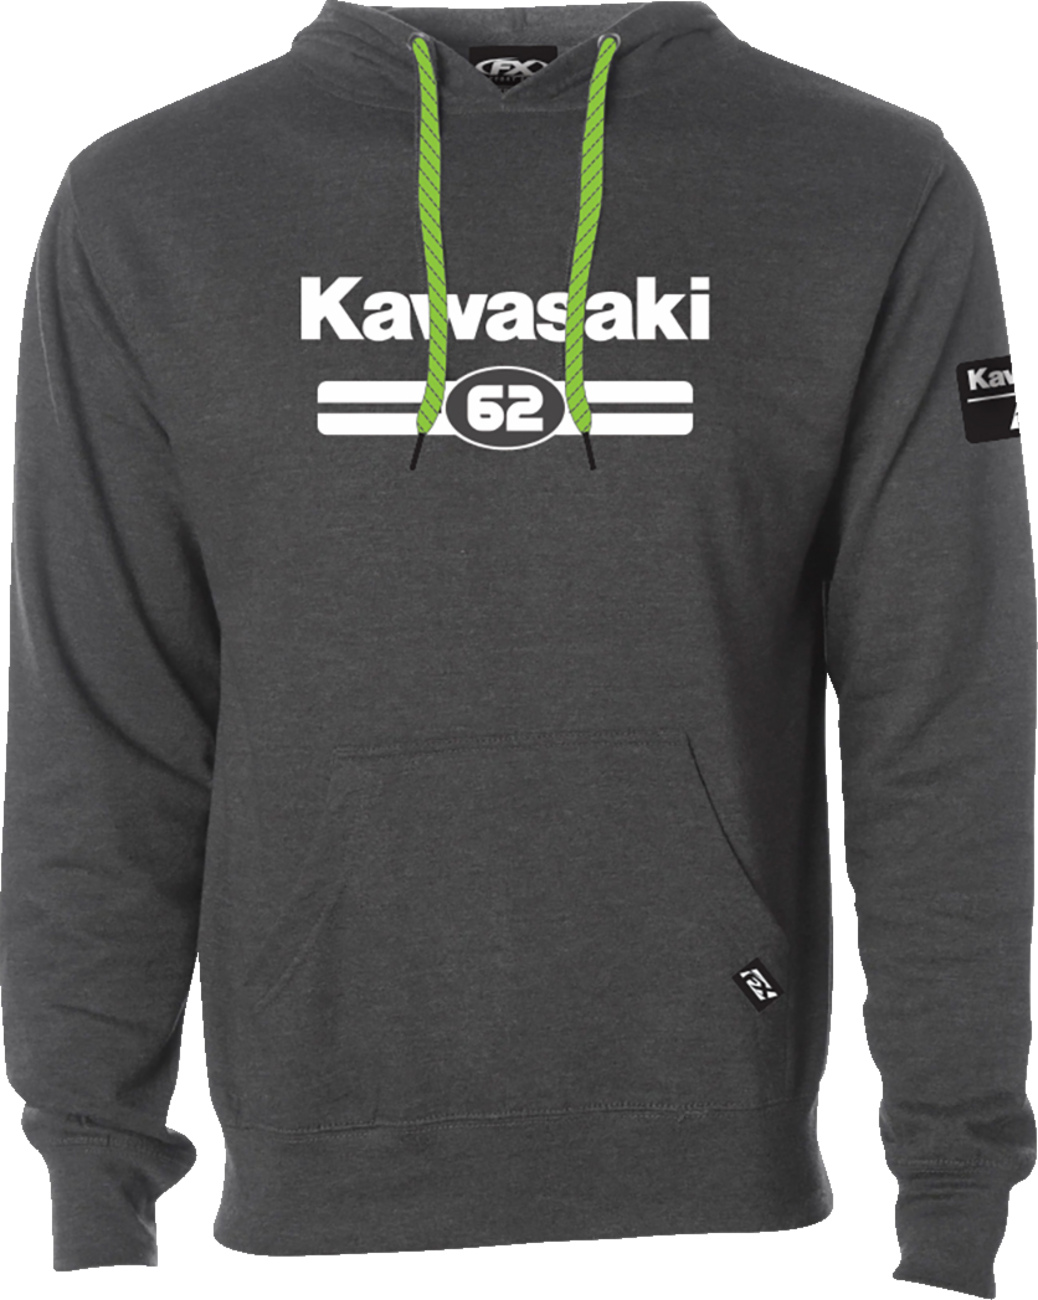 FACTORY EFFEX Kawasaki Sixty Two Pullover Hoodie - Heather Charcoal - Large 27-88104